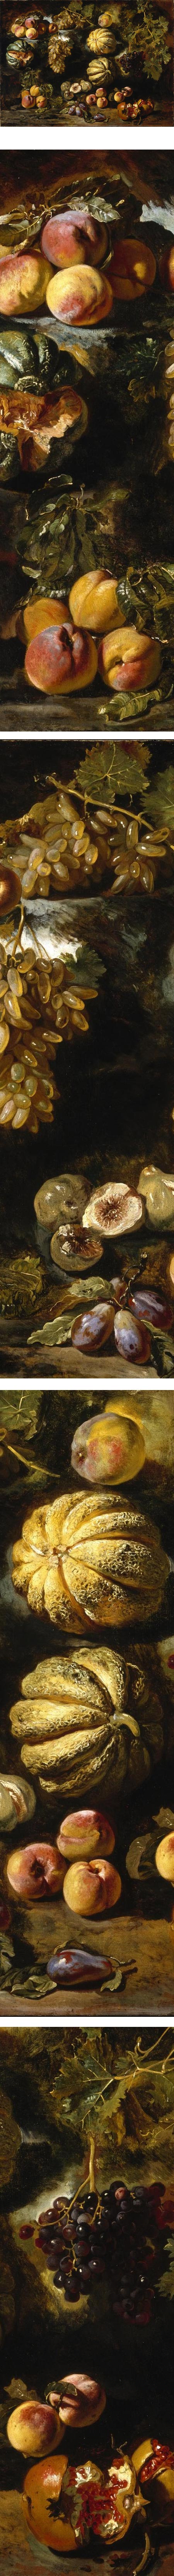 Still Life with Melons, Peaches, Figs, and Grapes, Michele Pace del Campidoglio, 17th century